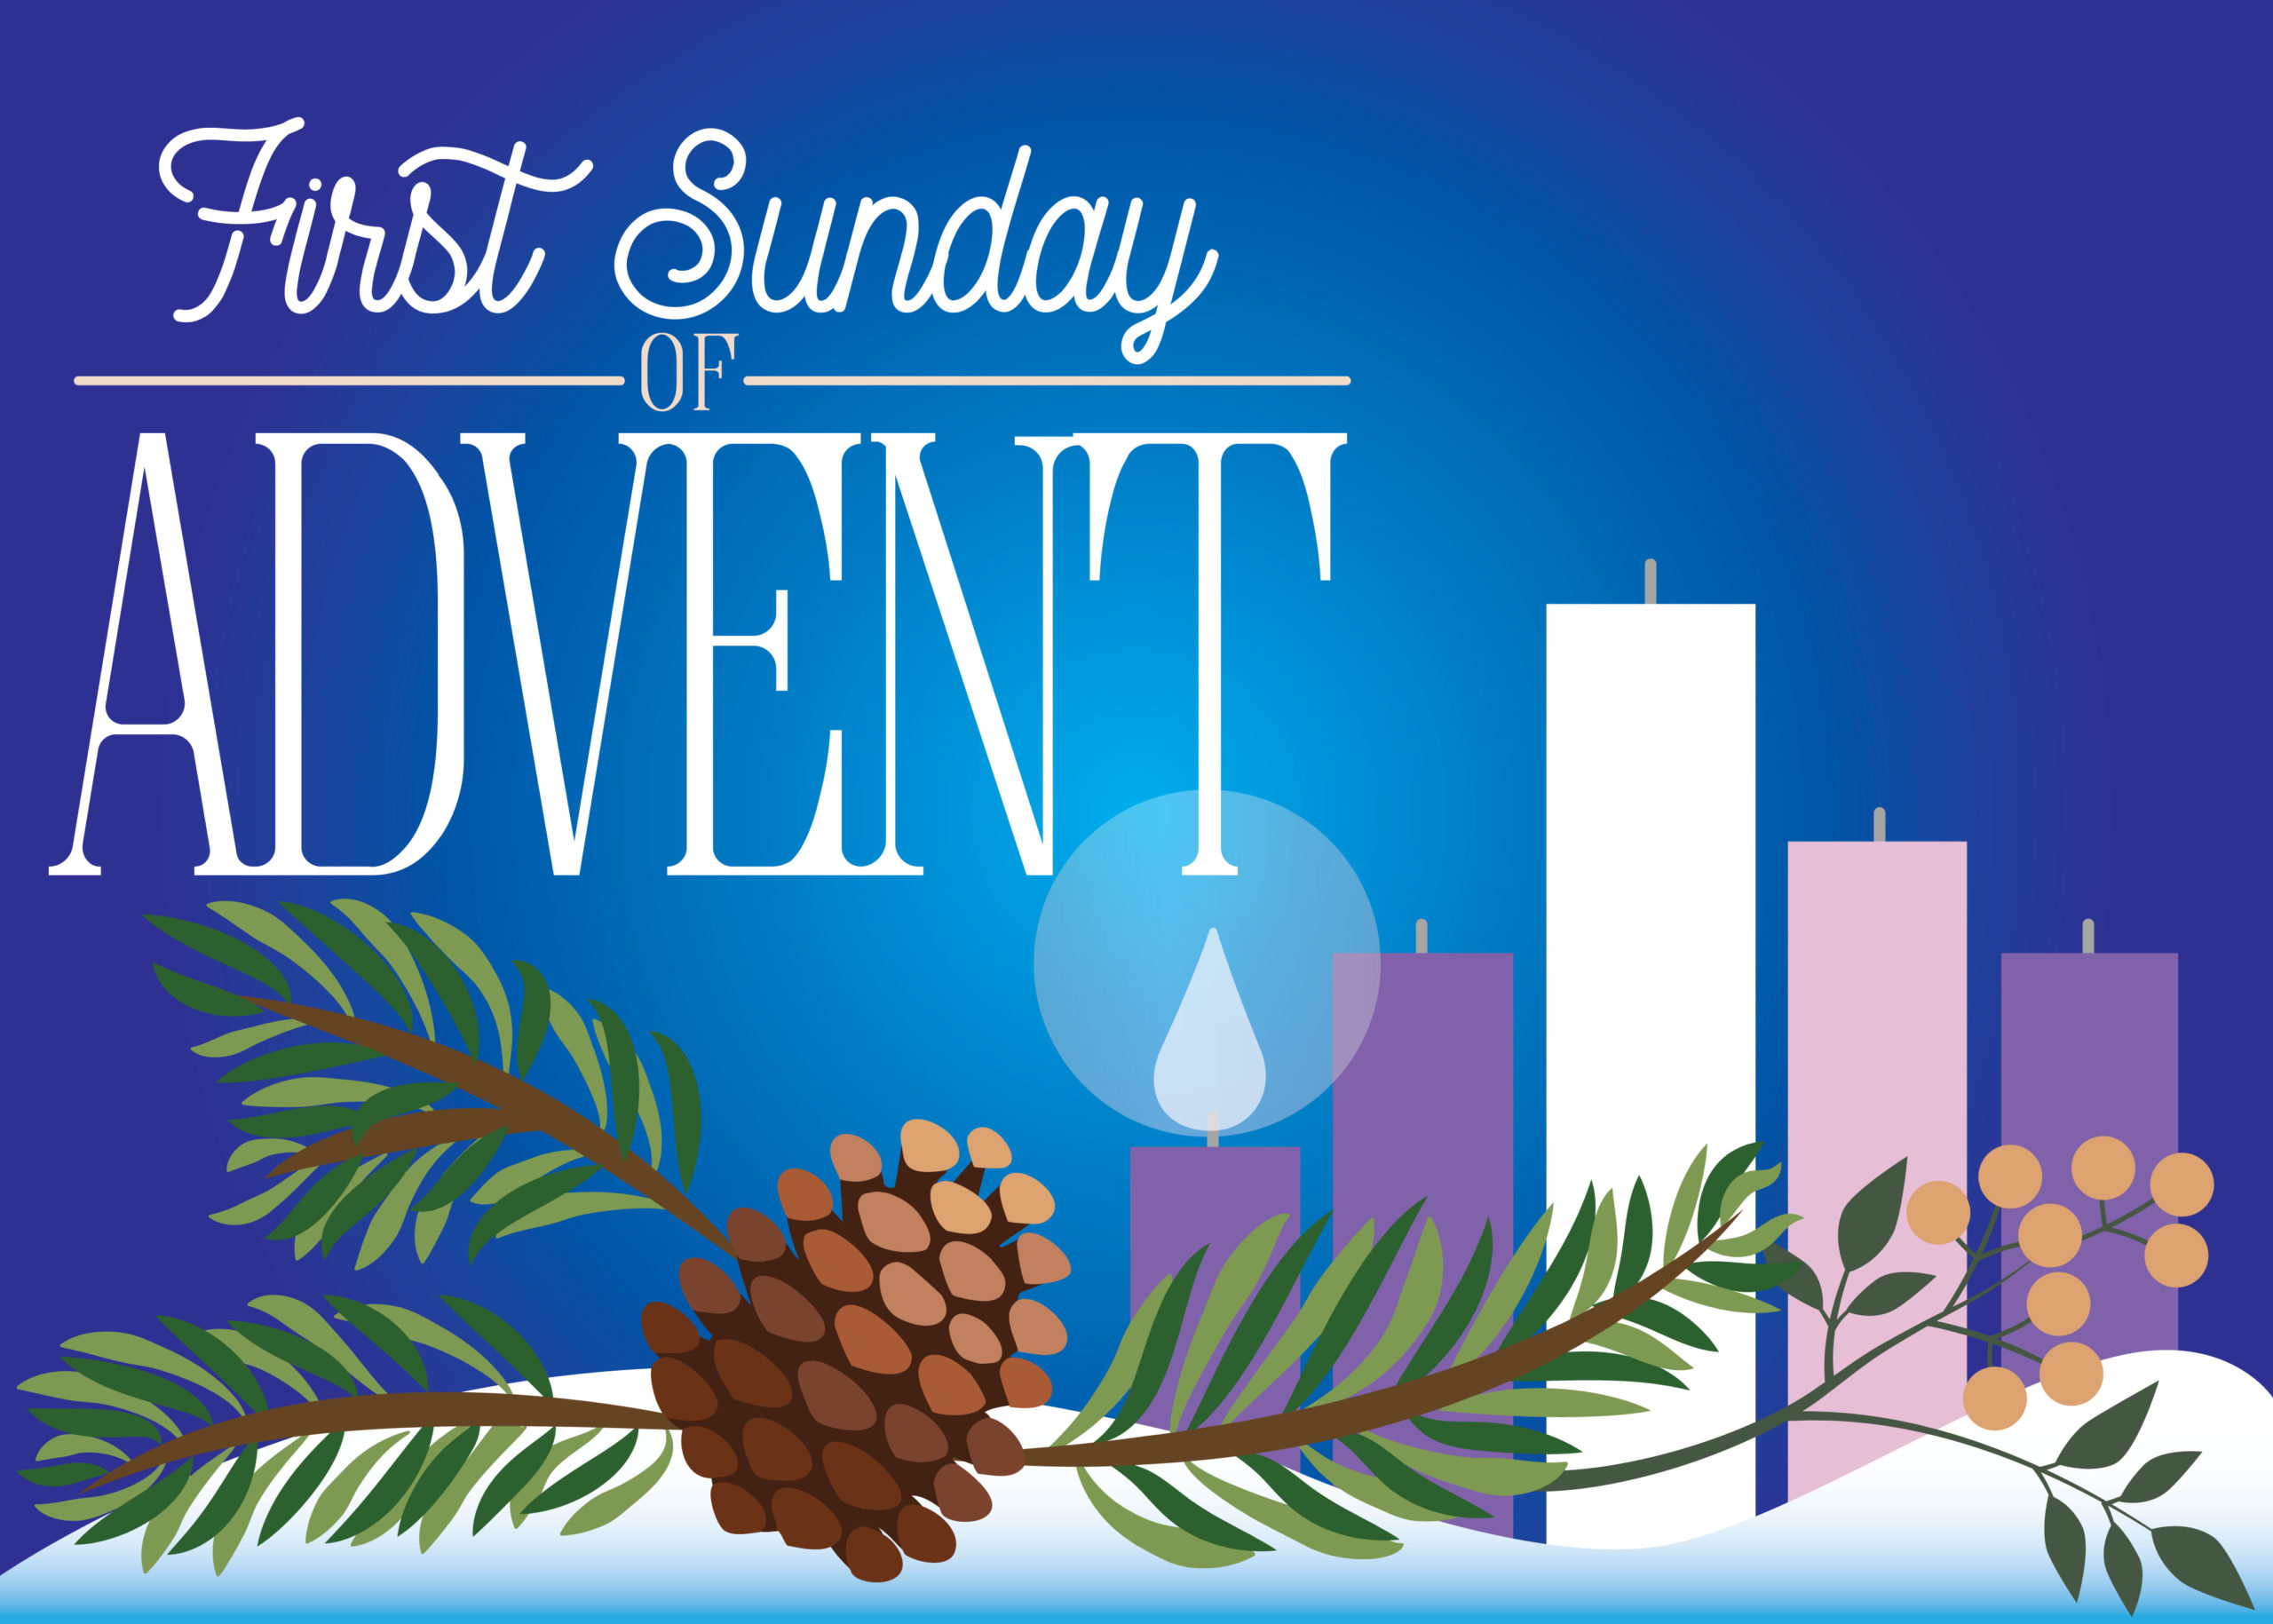 Join Us for Worship & Communion on the First Sunday of Advent (December